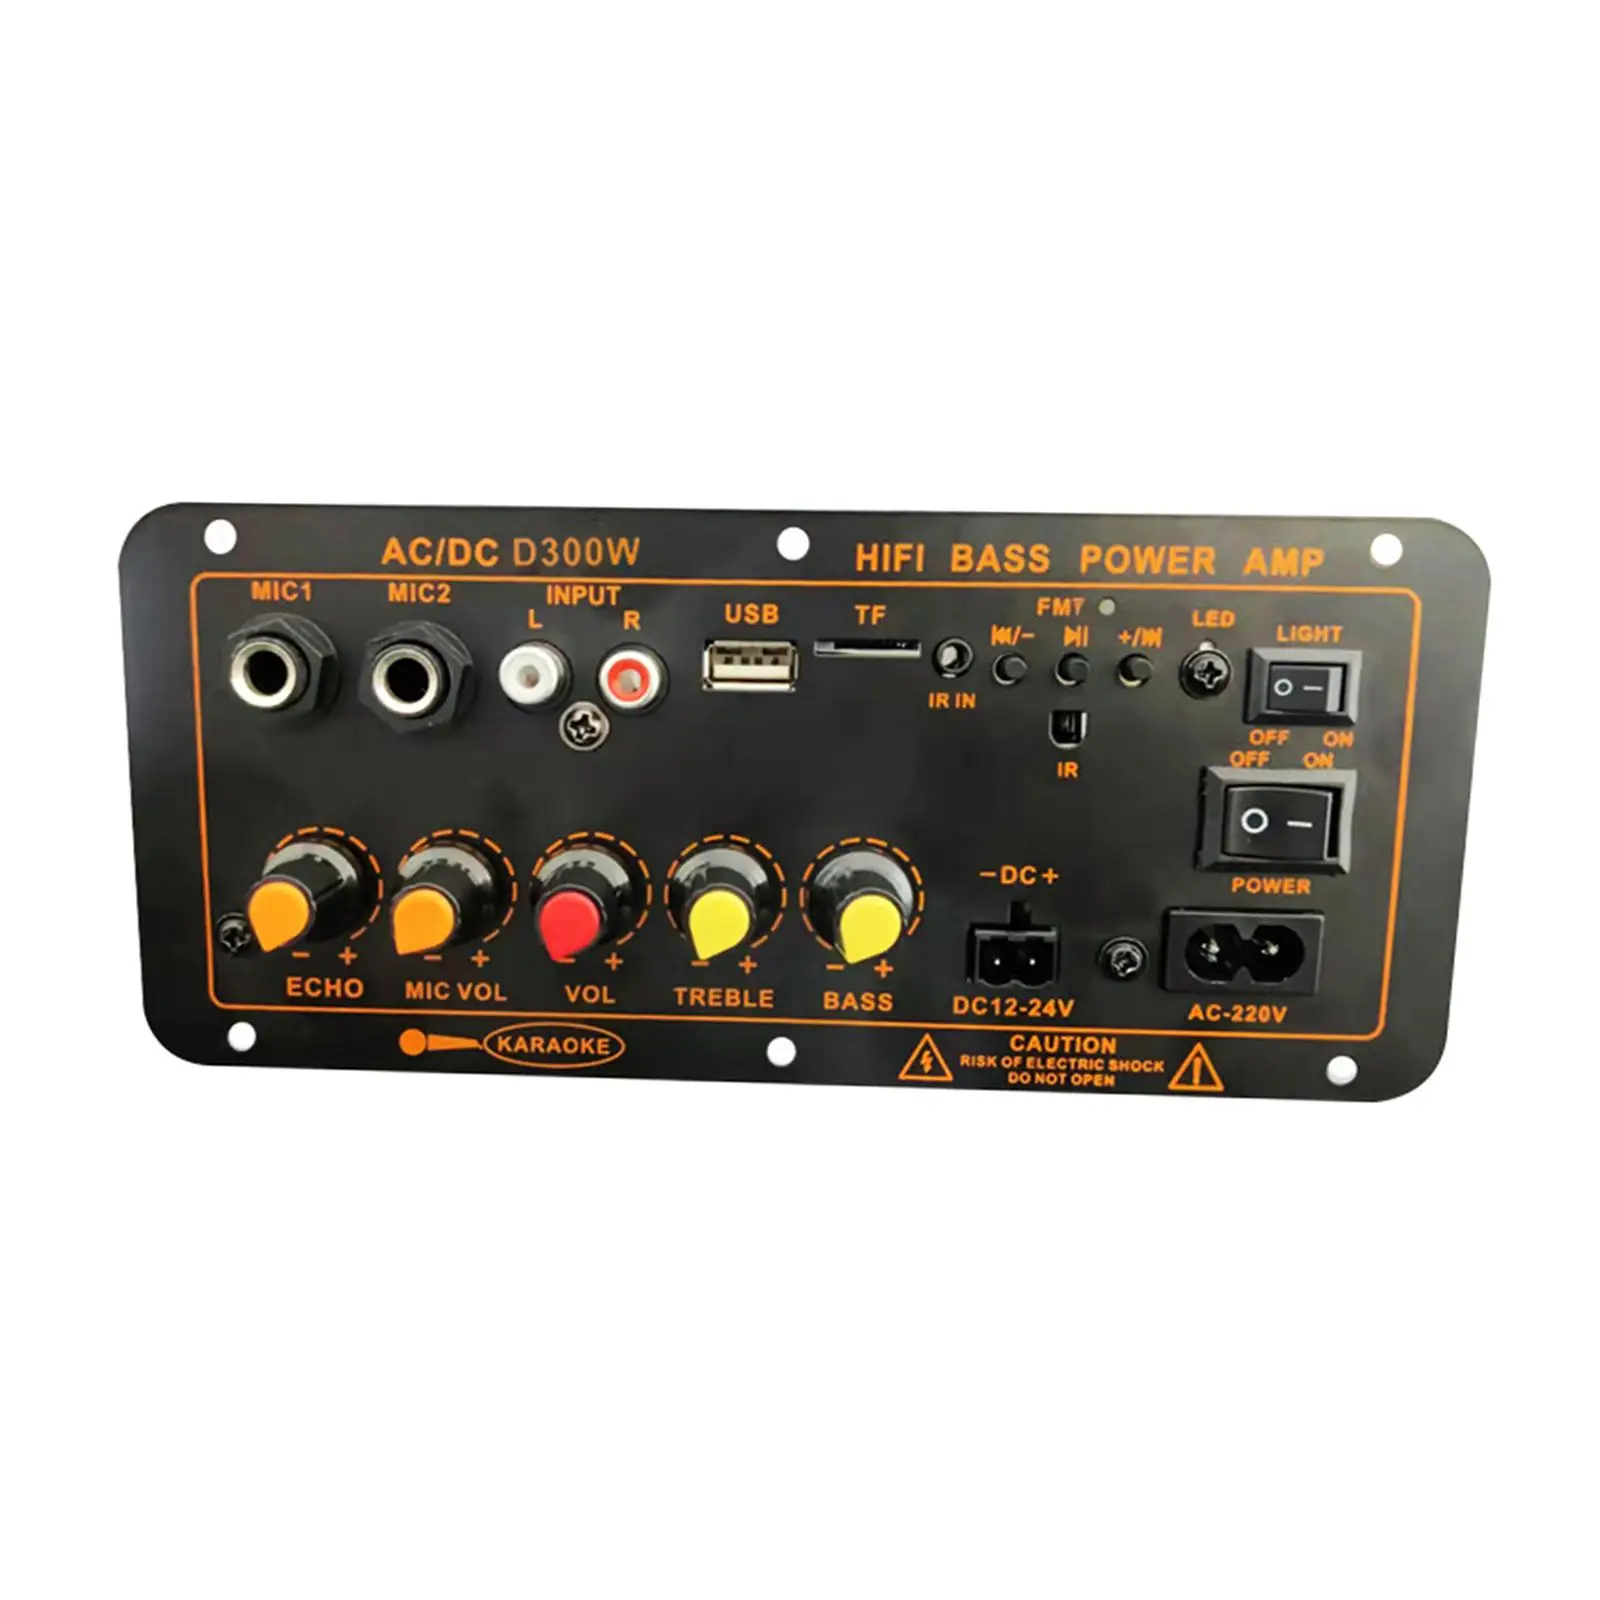 300W Bluetooth High Power Stereo Amplifier Board EU 220V Adapter Powerful Function Accessories Multiple Connectivity HiFi Bass